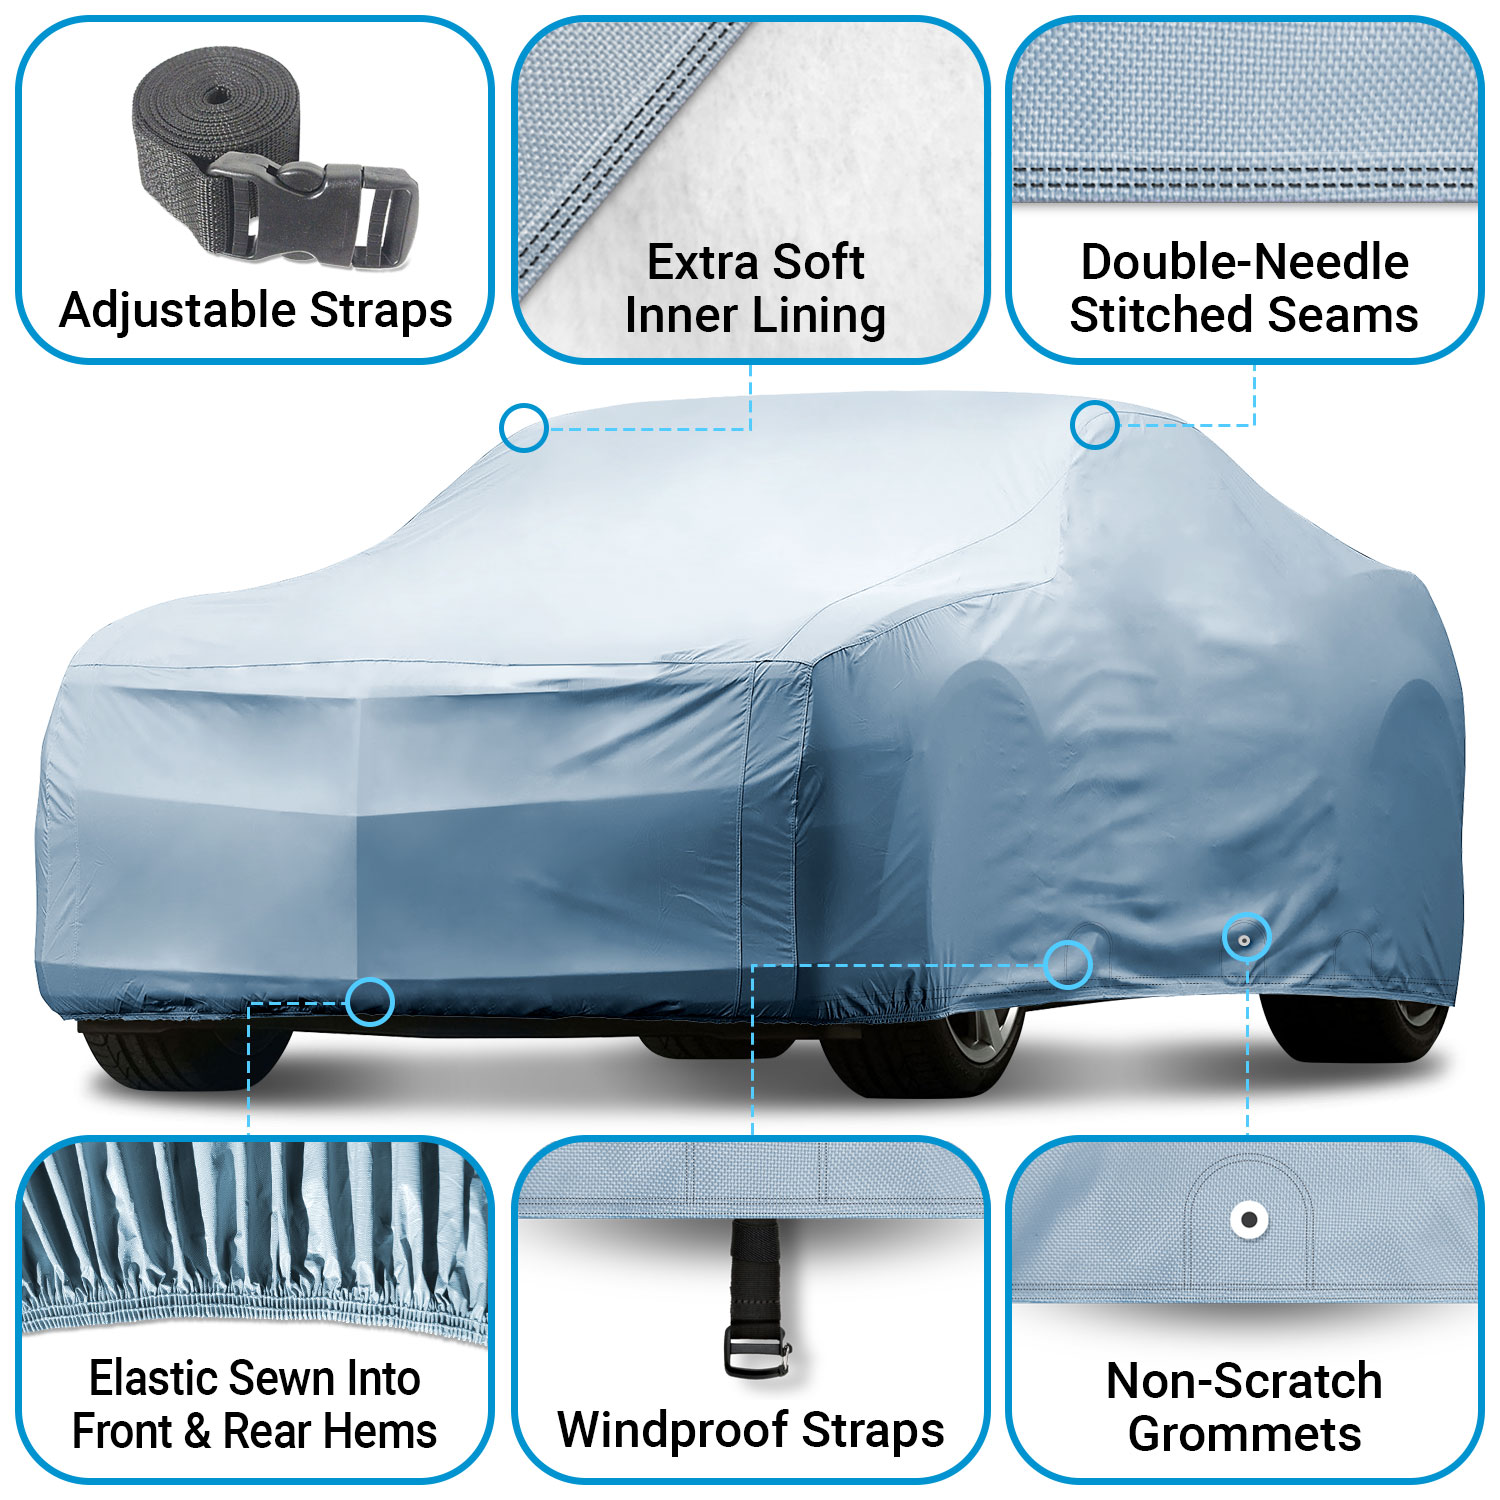 Custom Car Cover Fits: [BMW 3-Series Wagon] 2007-2012 Waterproof All-Weather - image 5 of 8